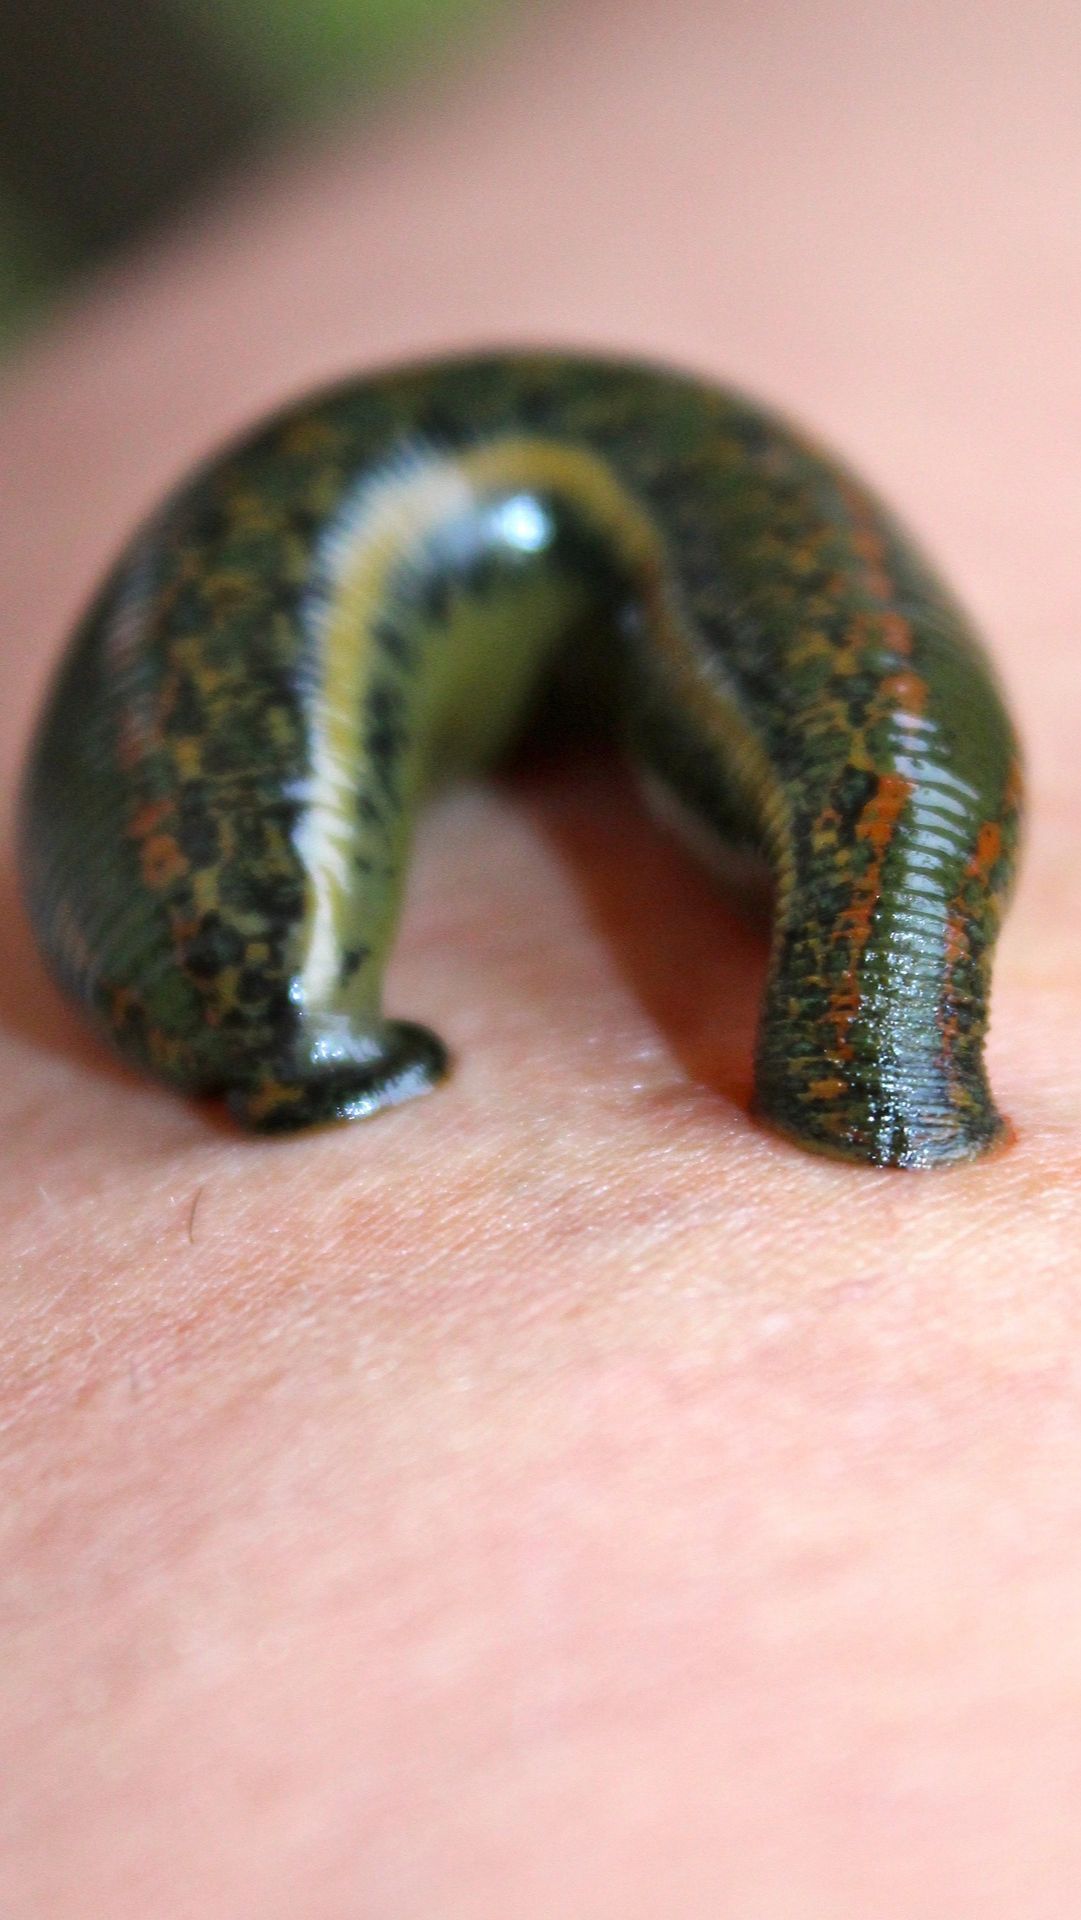 4. Leeches: Quiet Bloodsuckers of the Aquatic Realms<div><br></div><div> Leeches are infamous for their blood-sucking ways. These aquatic animals attach themselves to their hosts and feed on their blood. Leeches often leave a mark similar to vampire bites—leeches' secret and hidden strategy is the same as the mysterious nature of vampires.<div><br></div><div>Photo: flickr/EllWi</div></div>